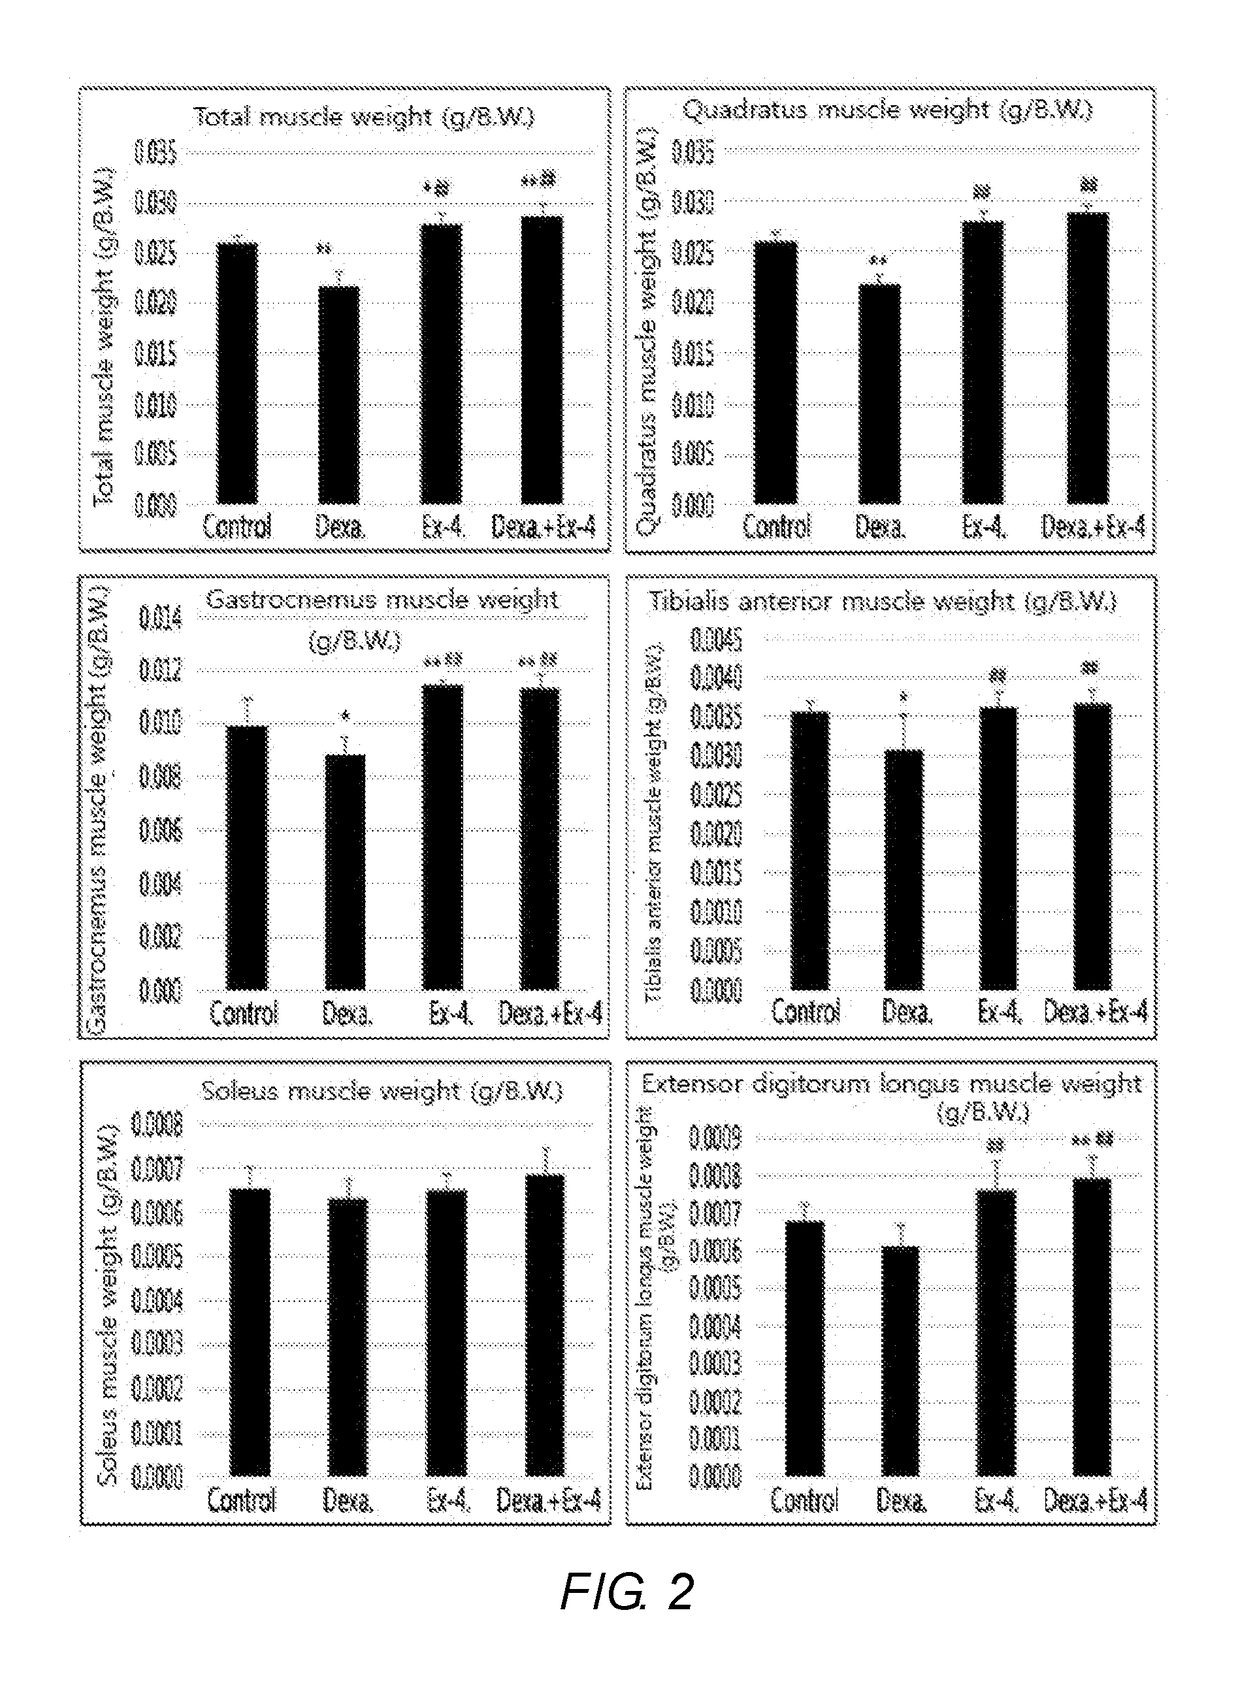 Pharmaceutical composition for treating sarcopenia including glucagon-like peptide-1 receptor agonist